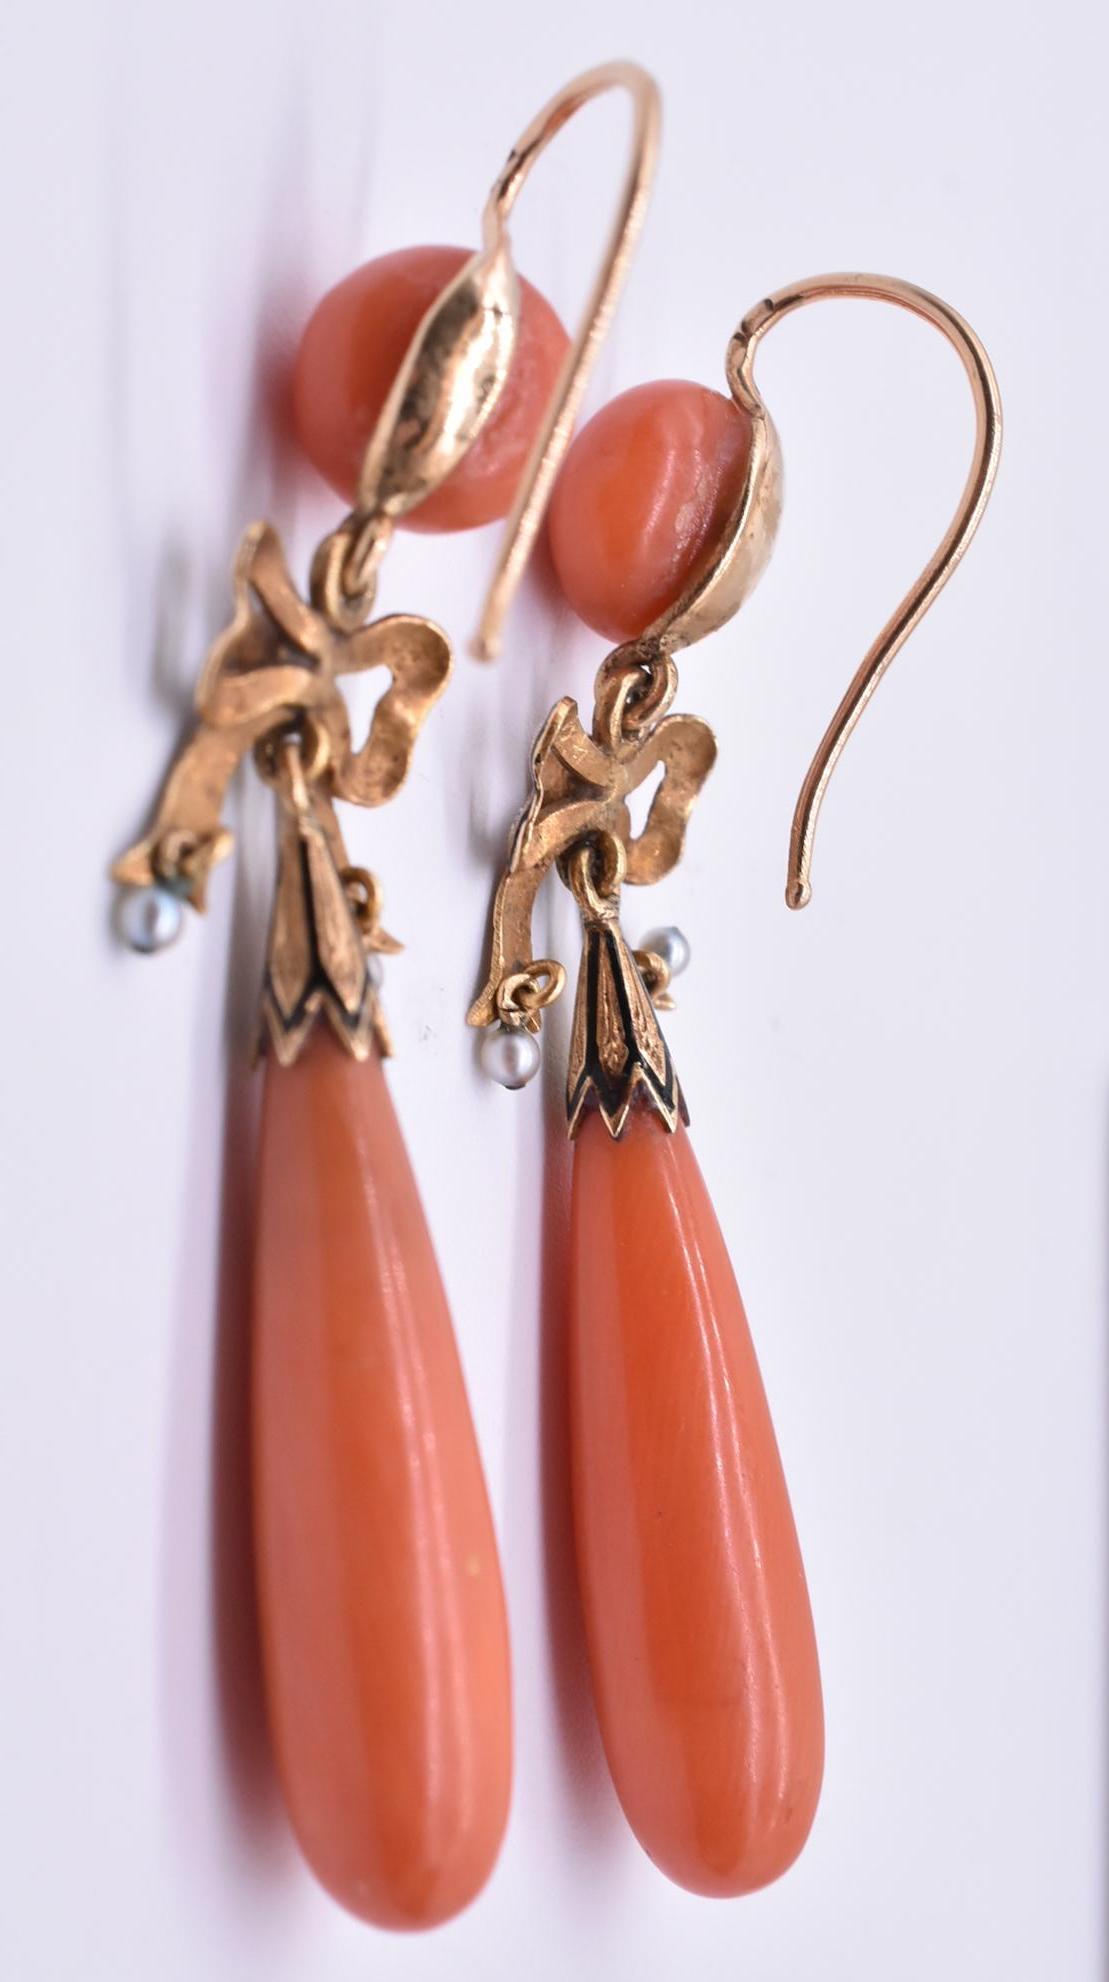 Antique Coral Earrings with Pearls and Enamel Bow 1